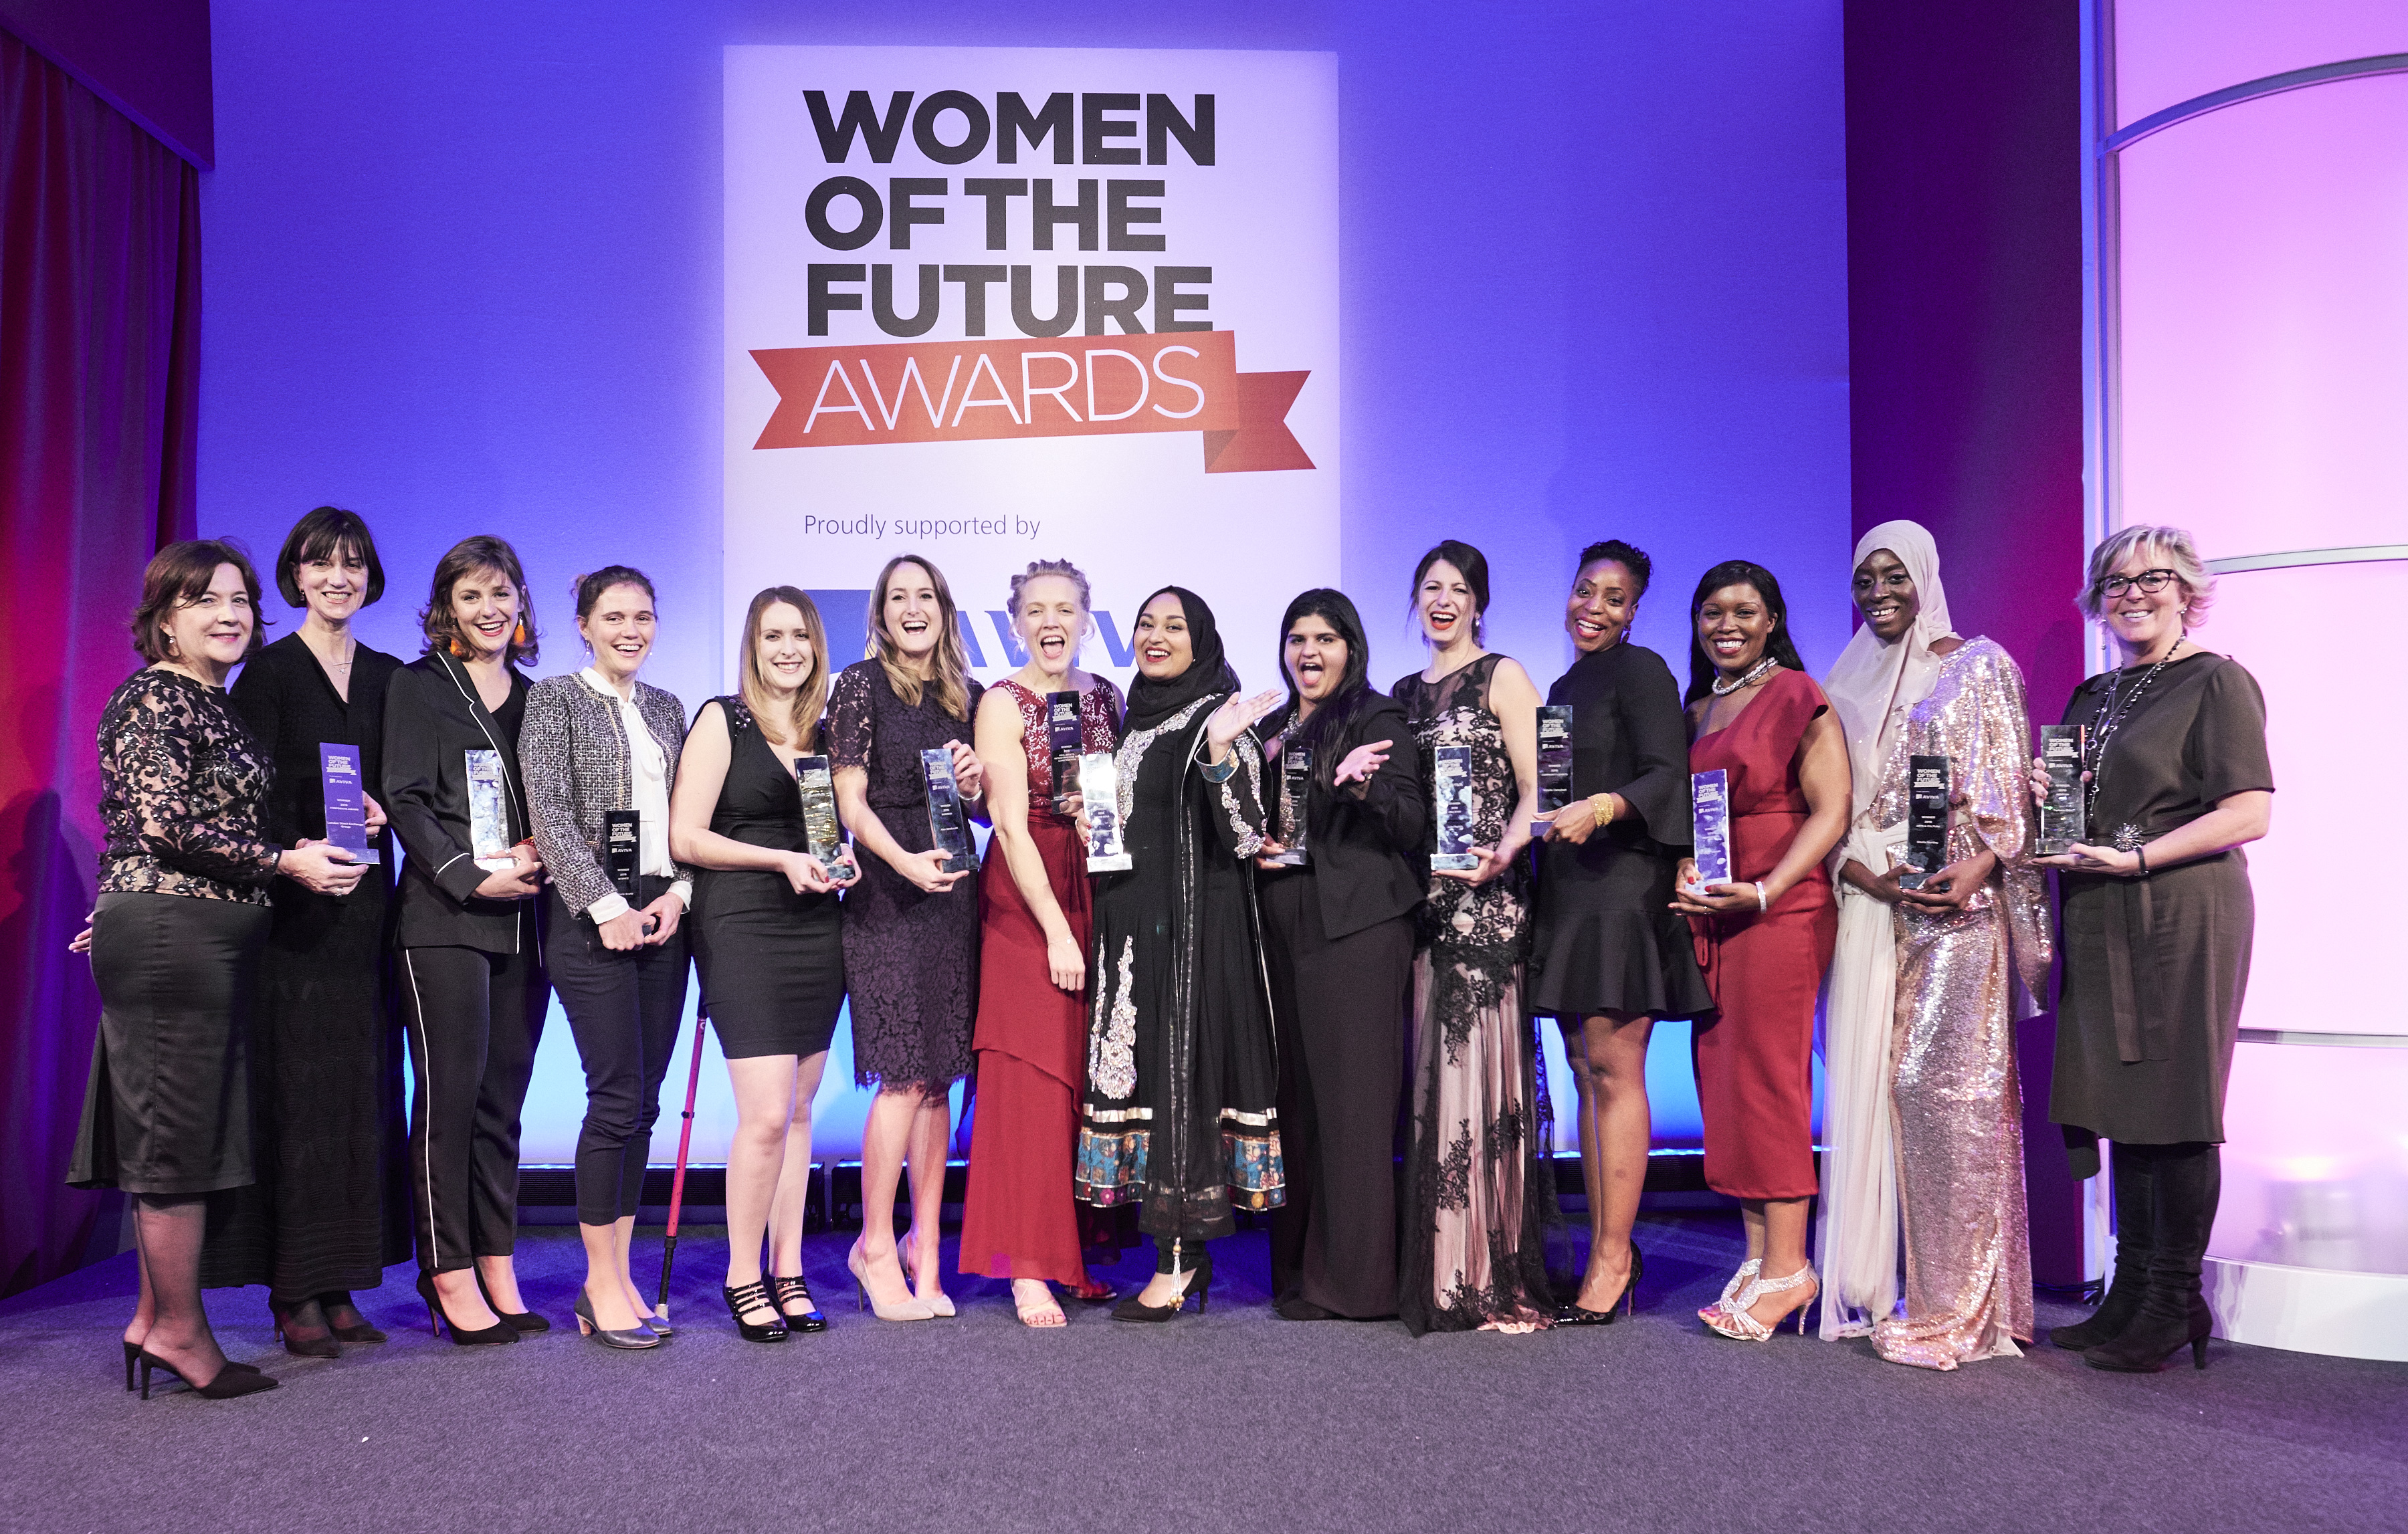 The Women of the Future Awards 2017